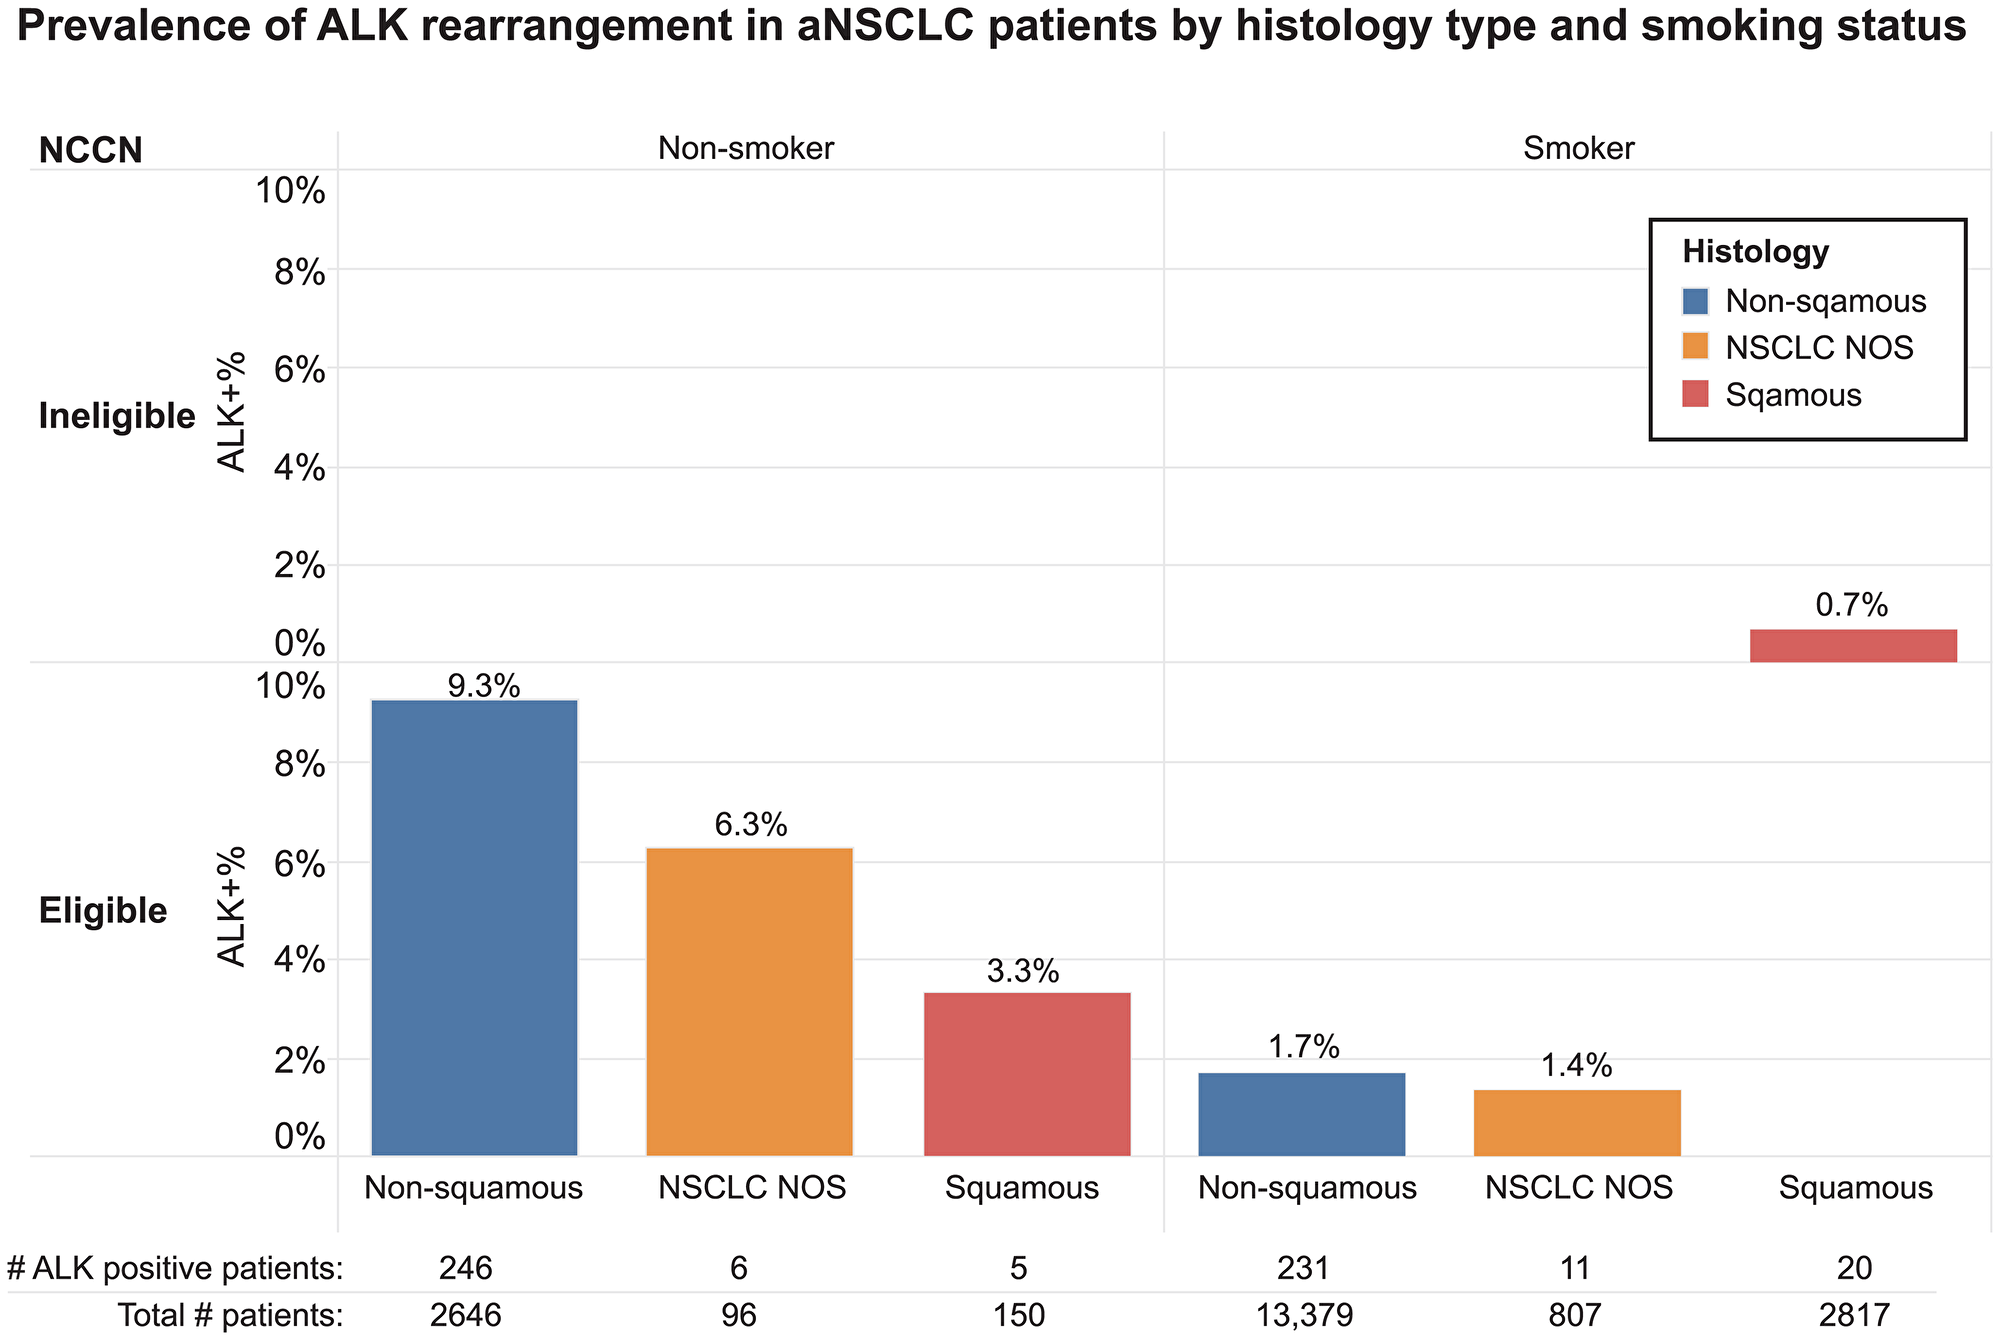 Figure 2: Prevalence of ALK rearrangement in aNSCLC patients by histology type and smoking status.